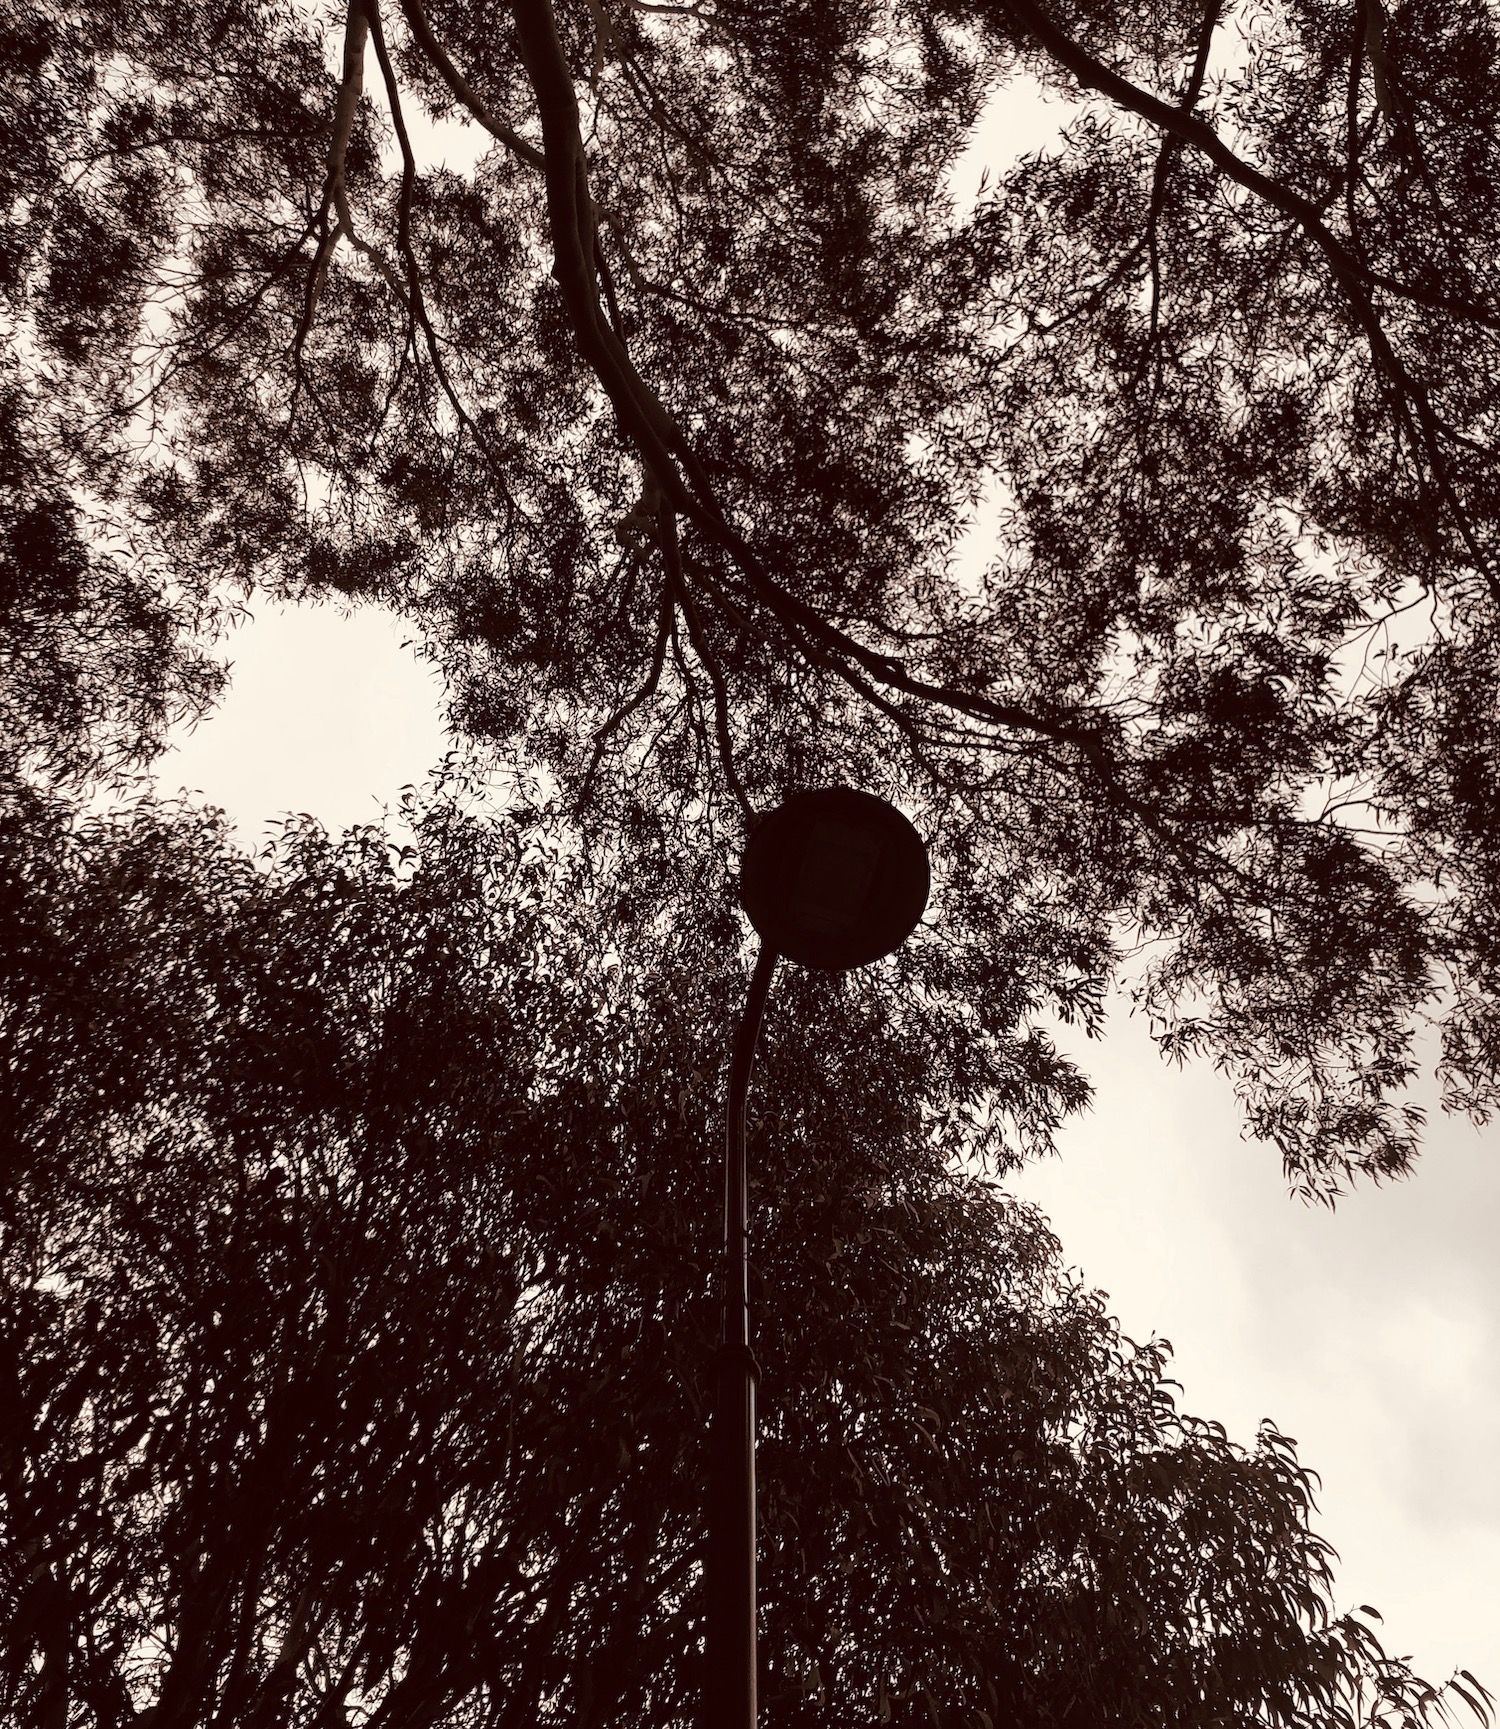 Do Planners Dream of Electric Trees - Timmah Ball looking directly up from the ground to a canopy of trees in darkness silhouetted against the night sky